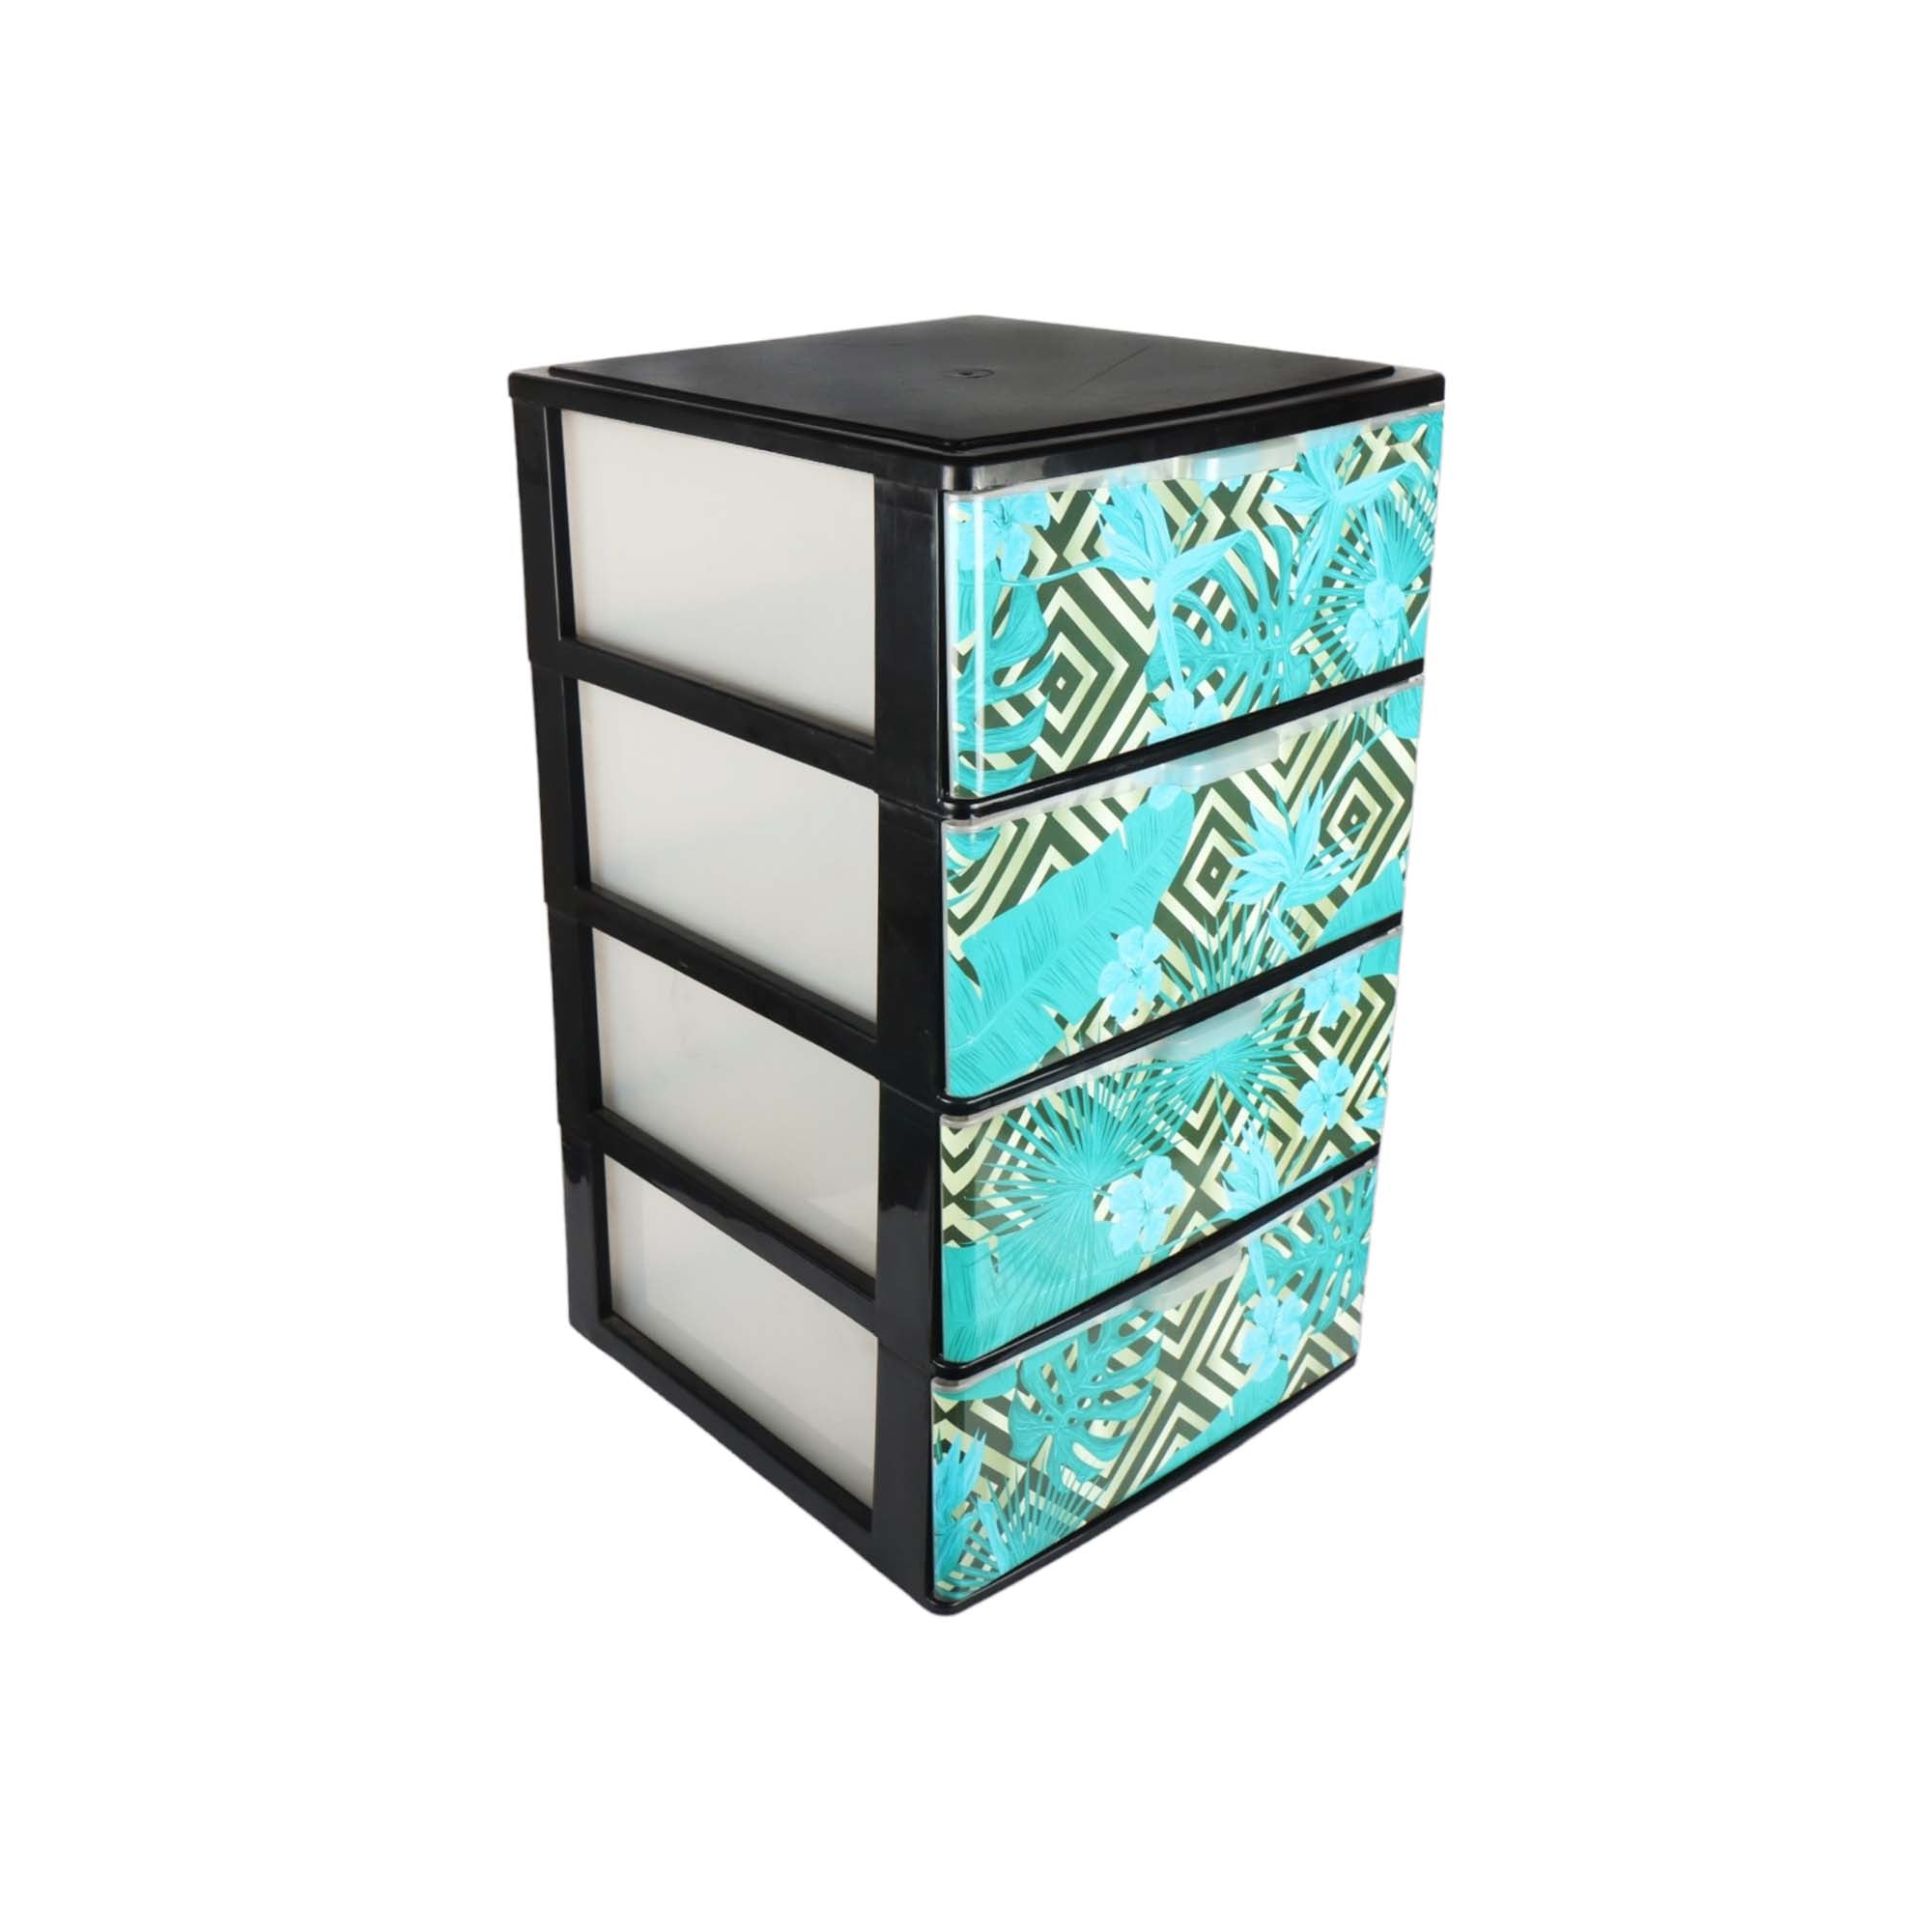 Nu Ware Storage 4 Drawer with Leaves Print 380x370x626